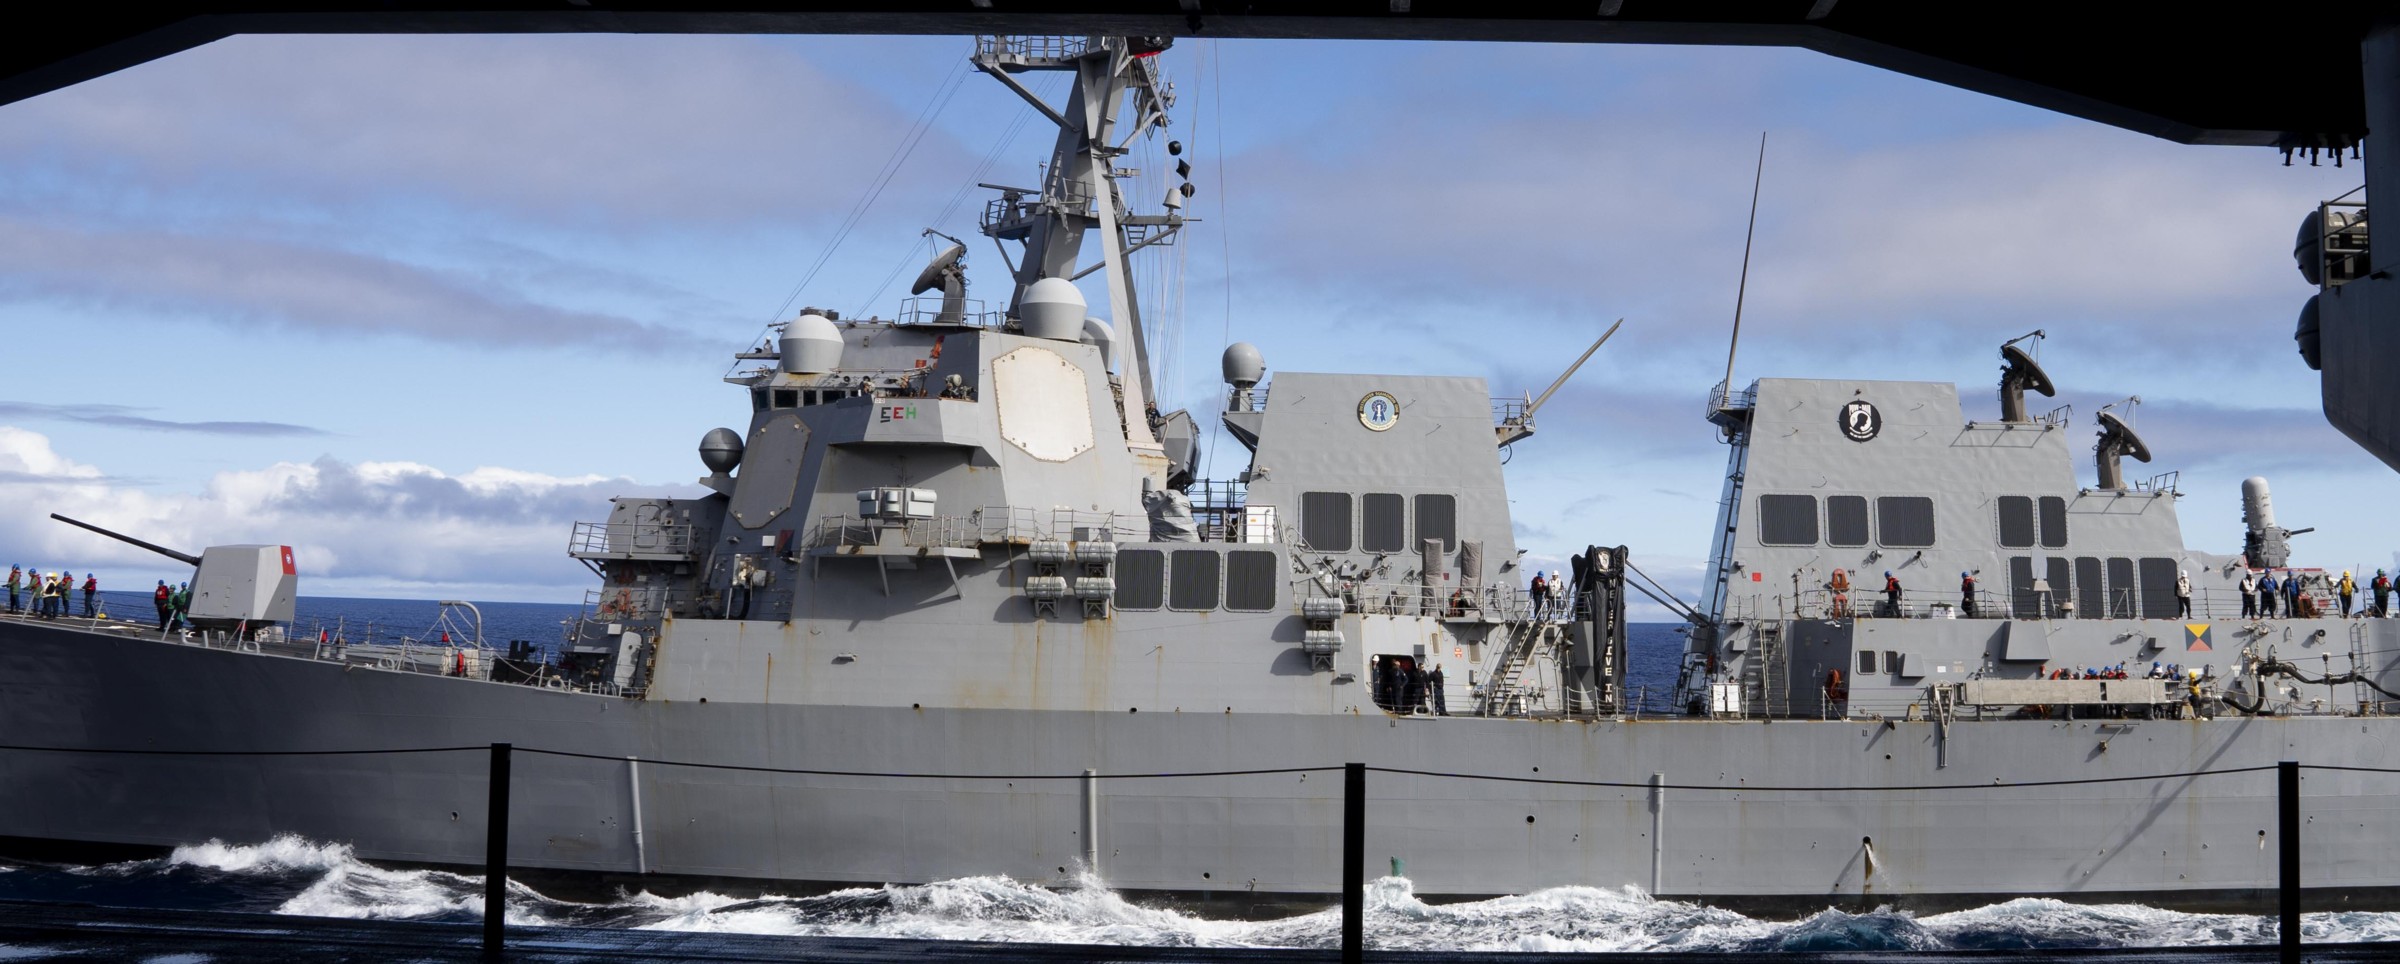 ddg-110 uss william p. lawrence arleigh burke class guided missile destroyer aegis us navy 89